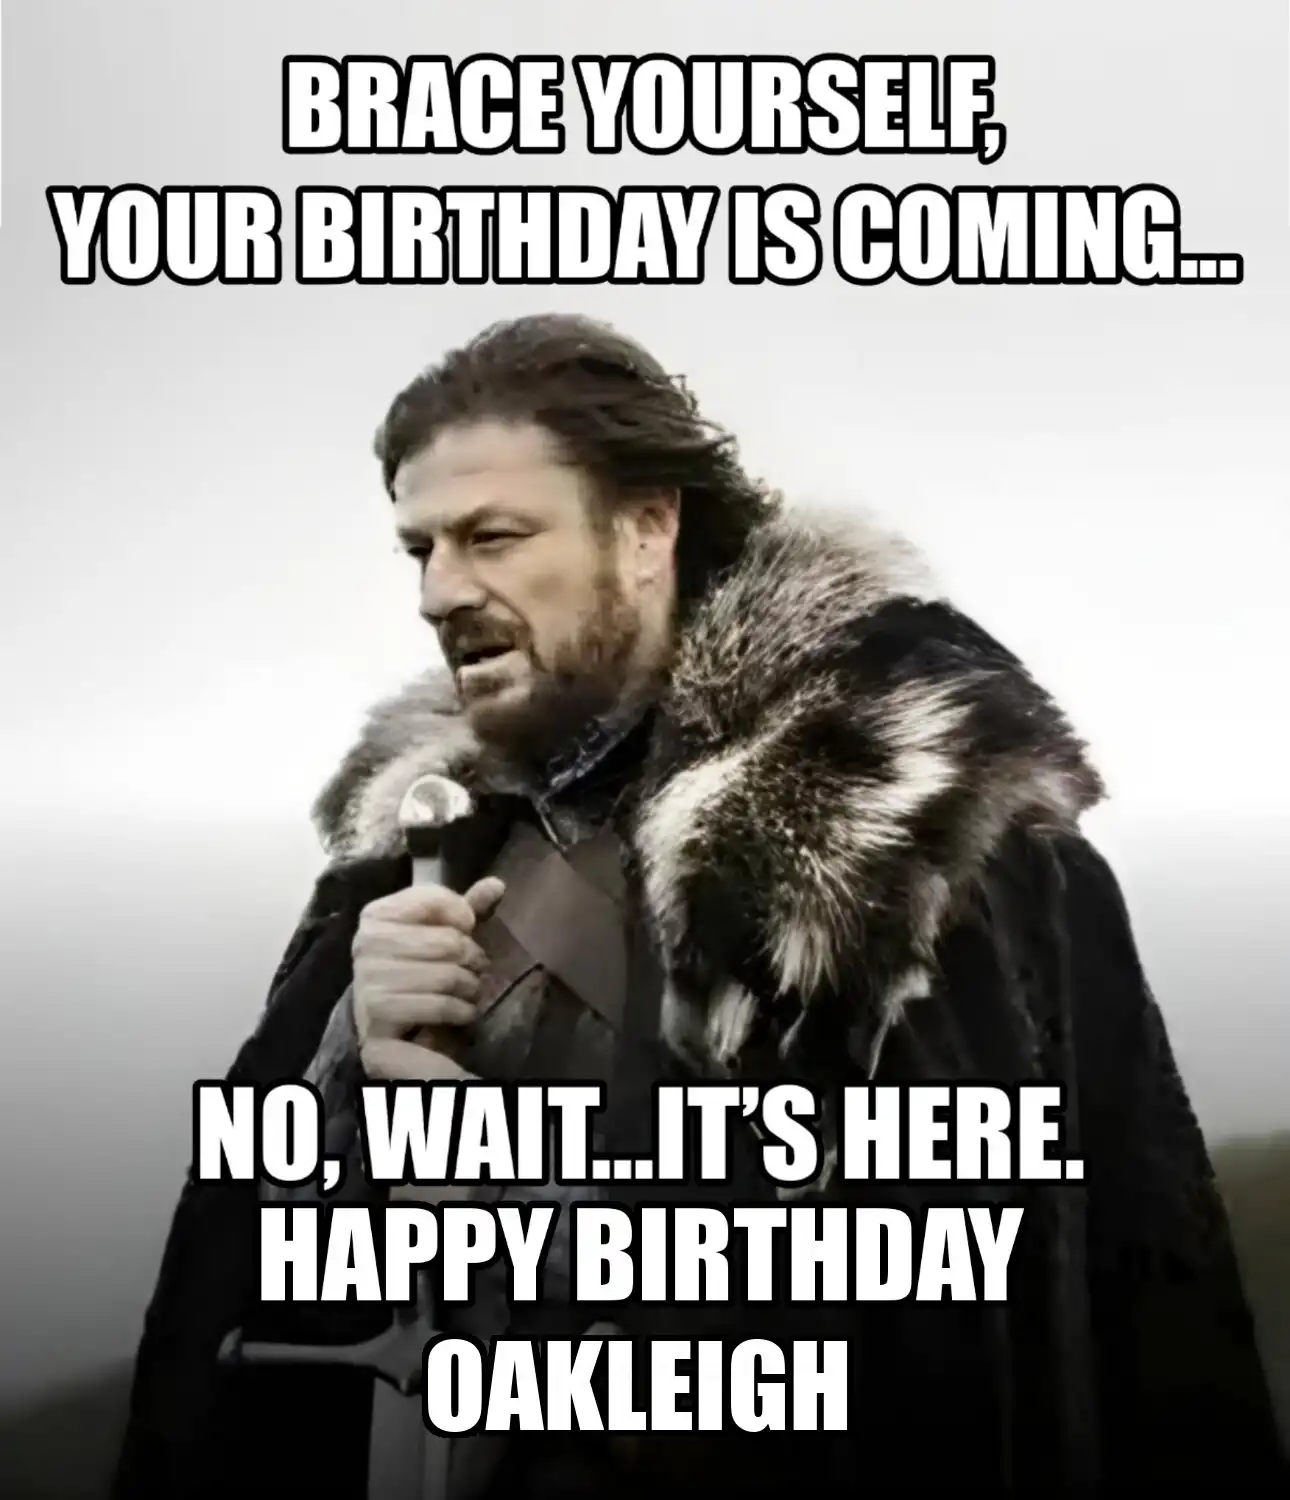 Happy Birthday Oakleigh Brace Yourself Your Birthday Is Coming Meme